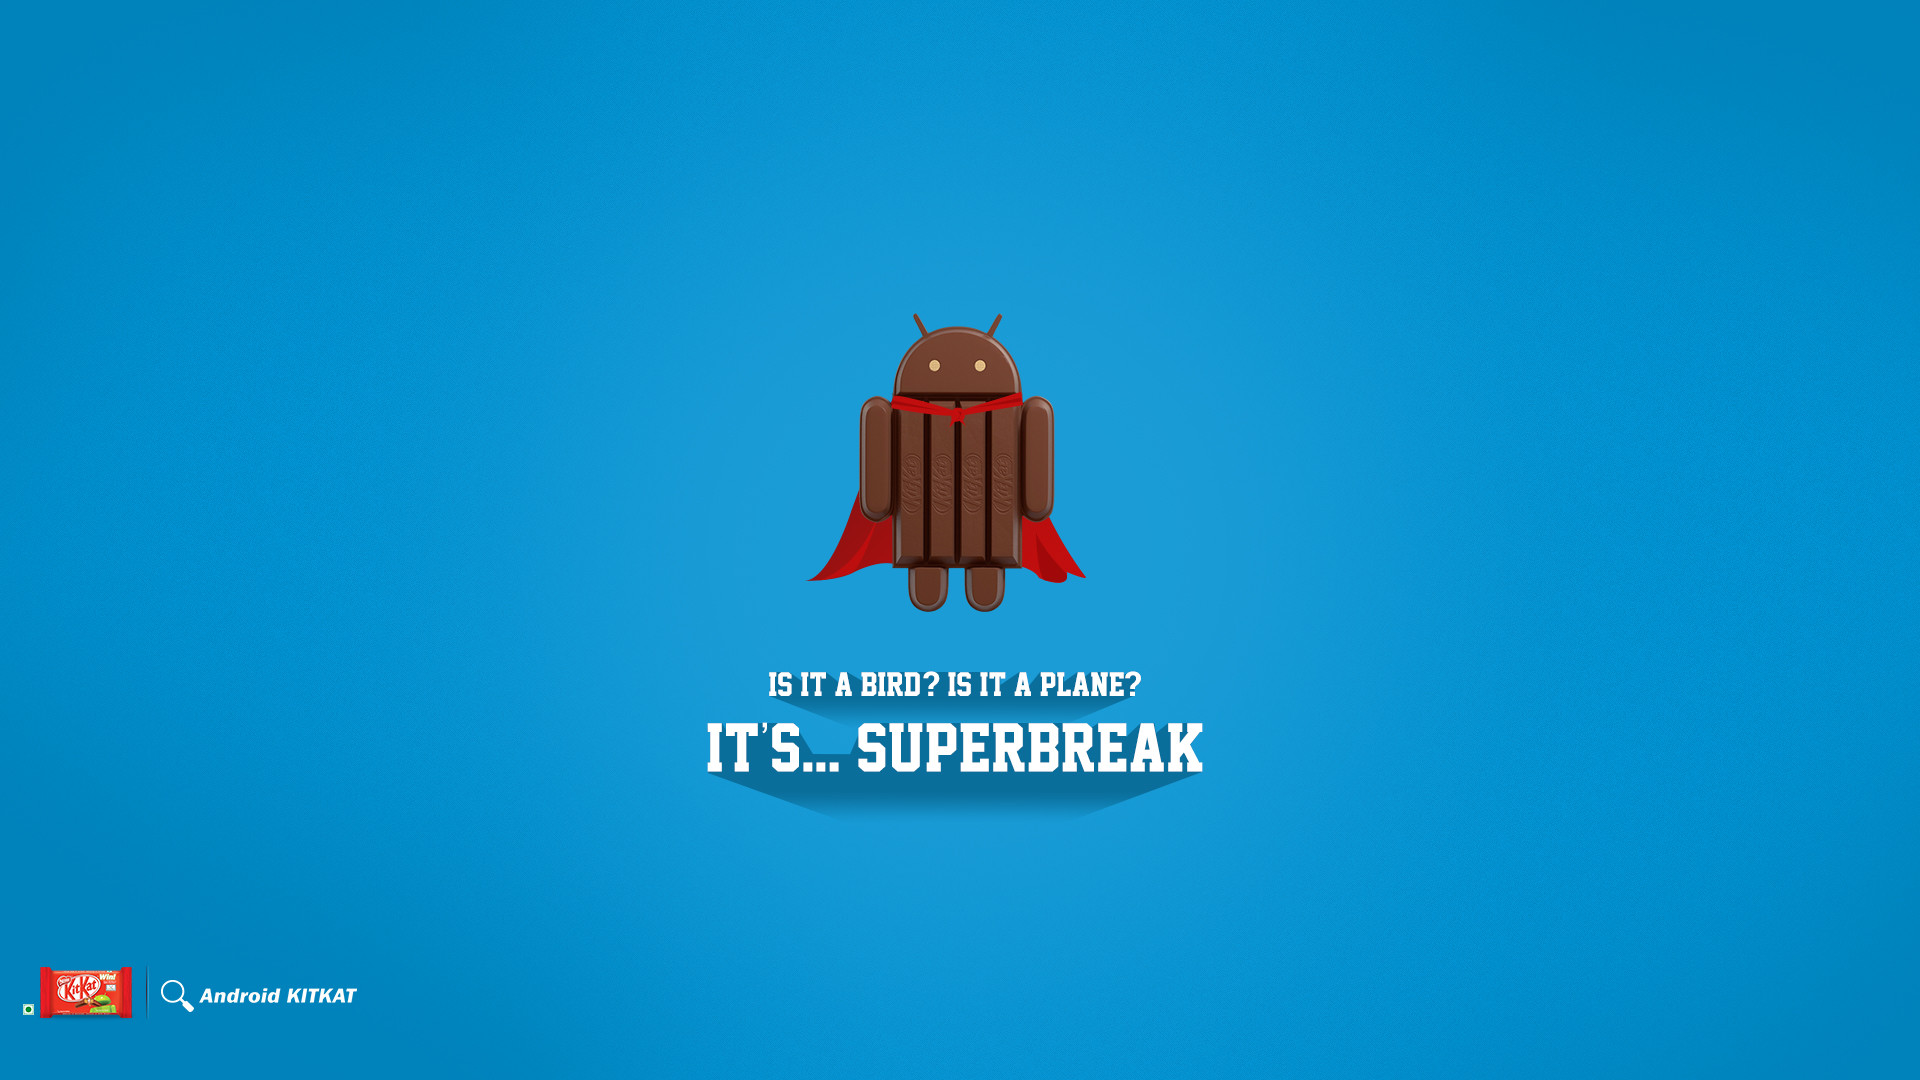 Android kitkat wallpaper hd for desktop View HD